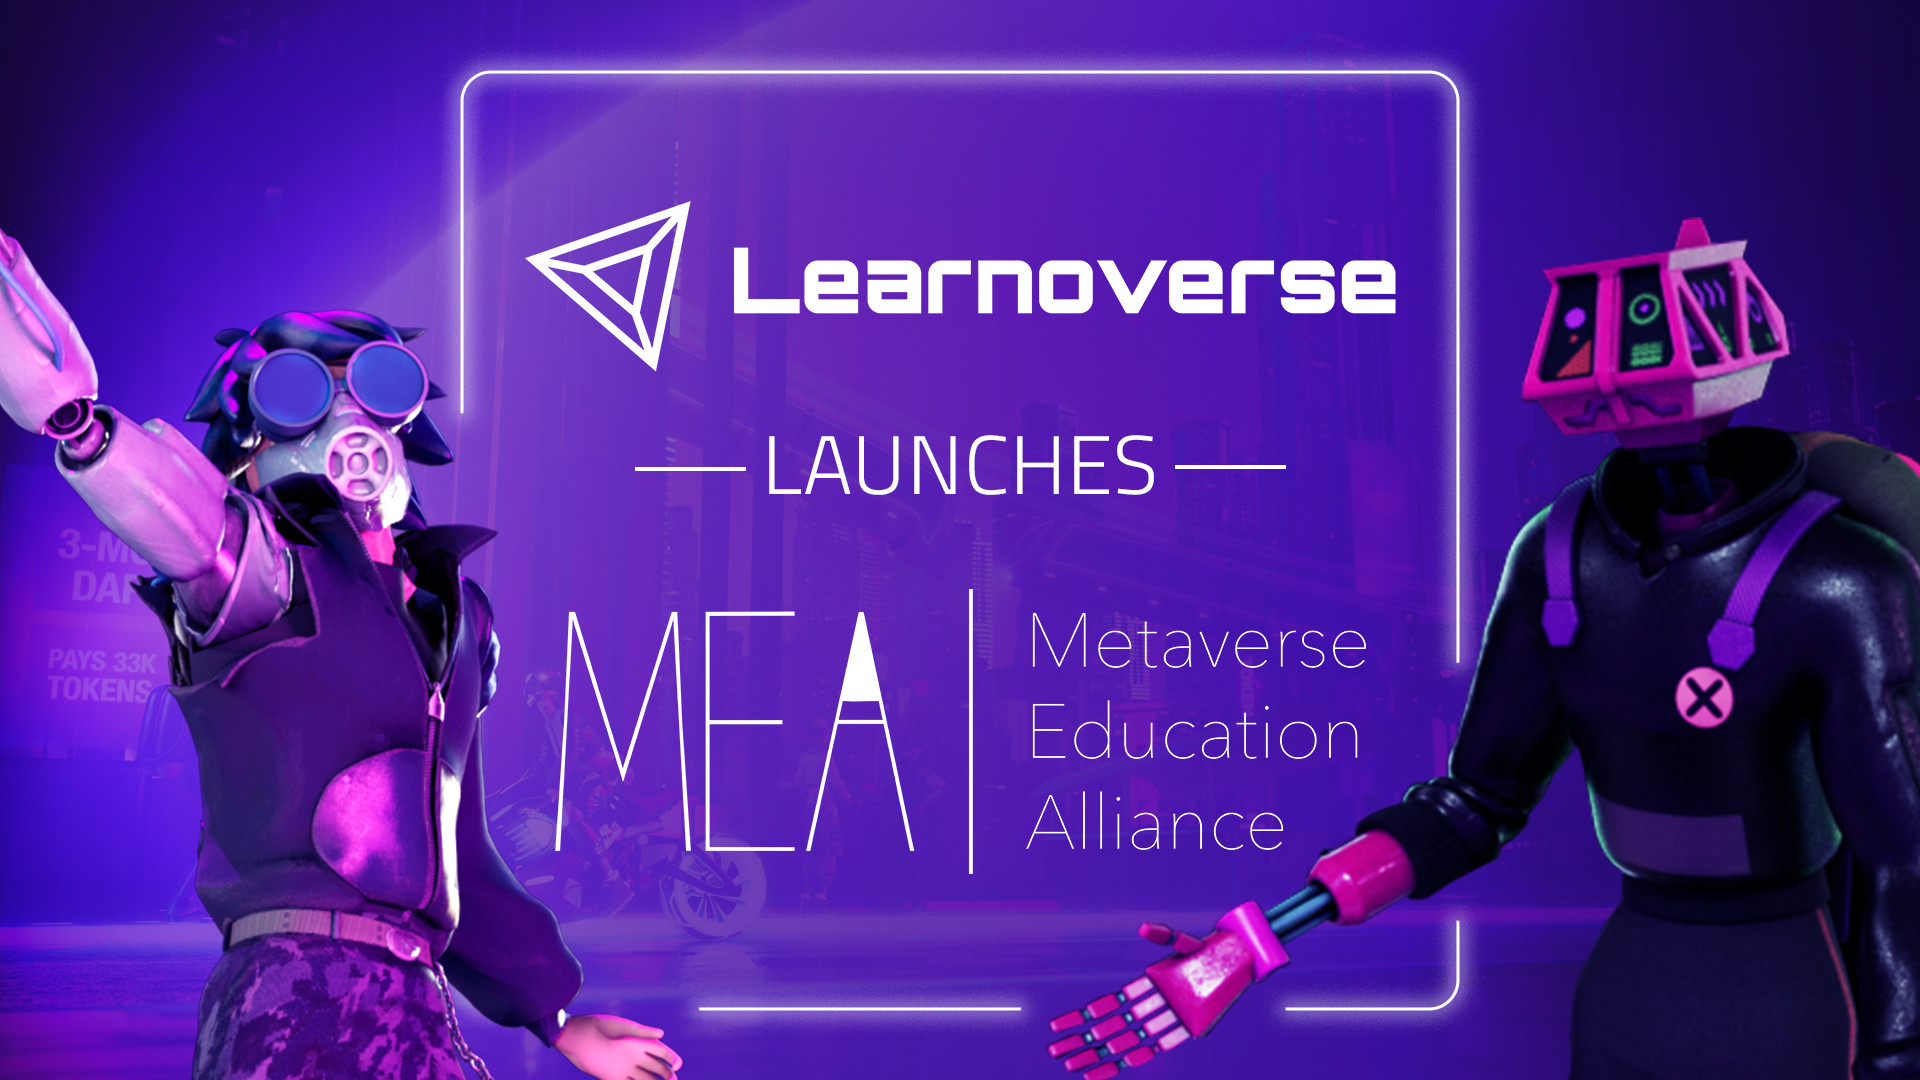 Learnoverse Launches Metaverse Education Alliance (MEA) cover image